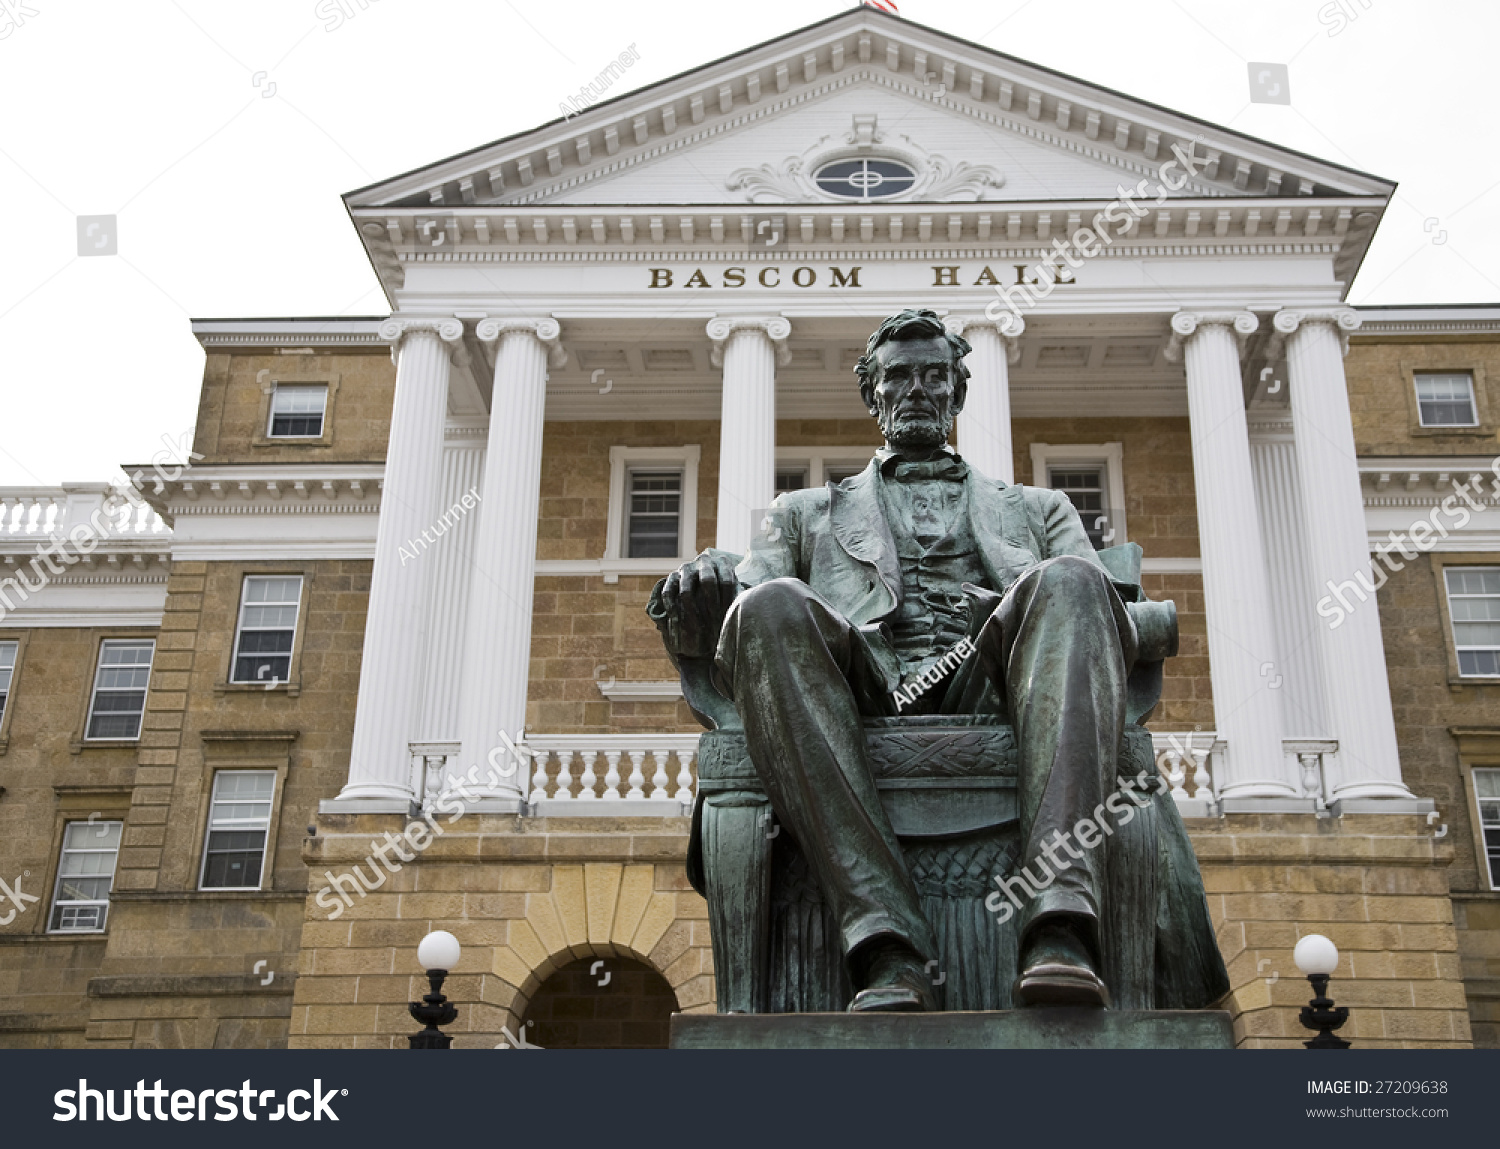 Image result for u of wisconsin statue of abe